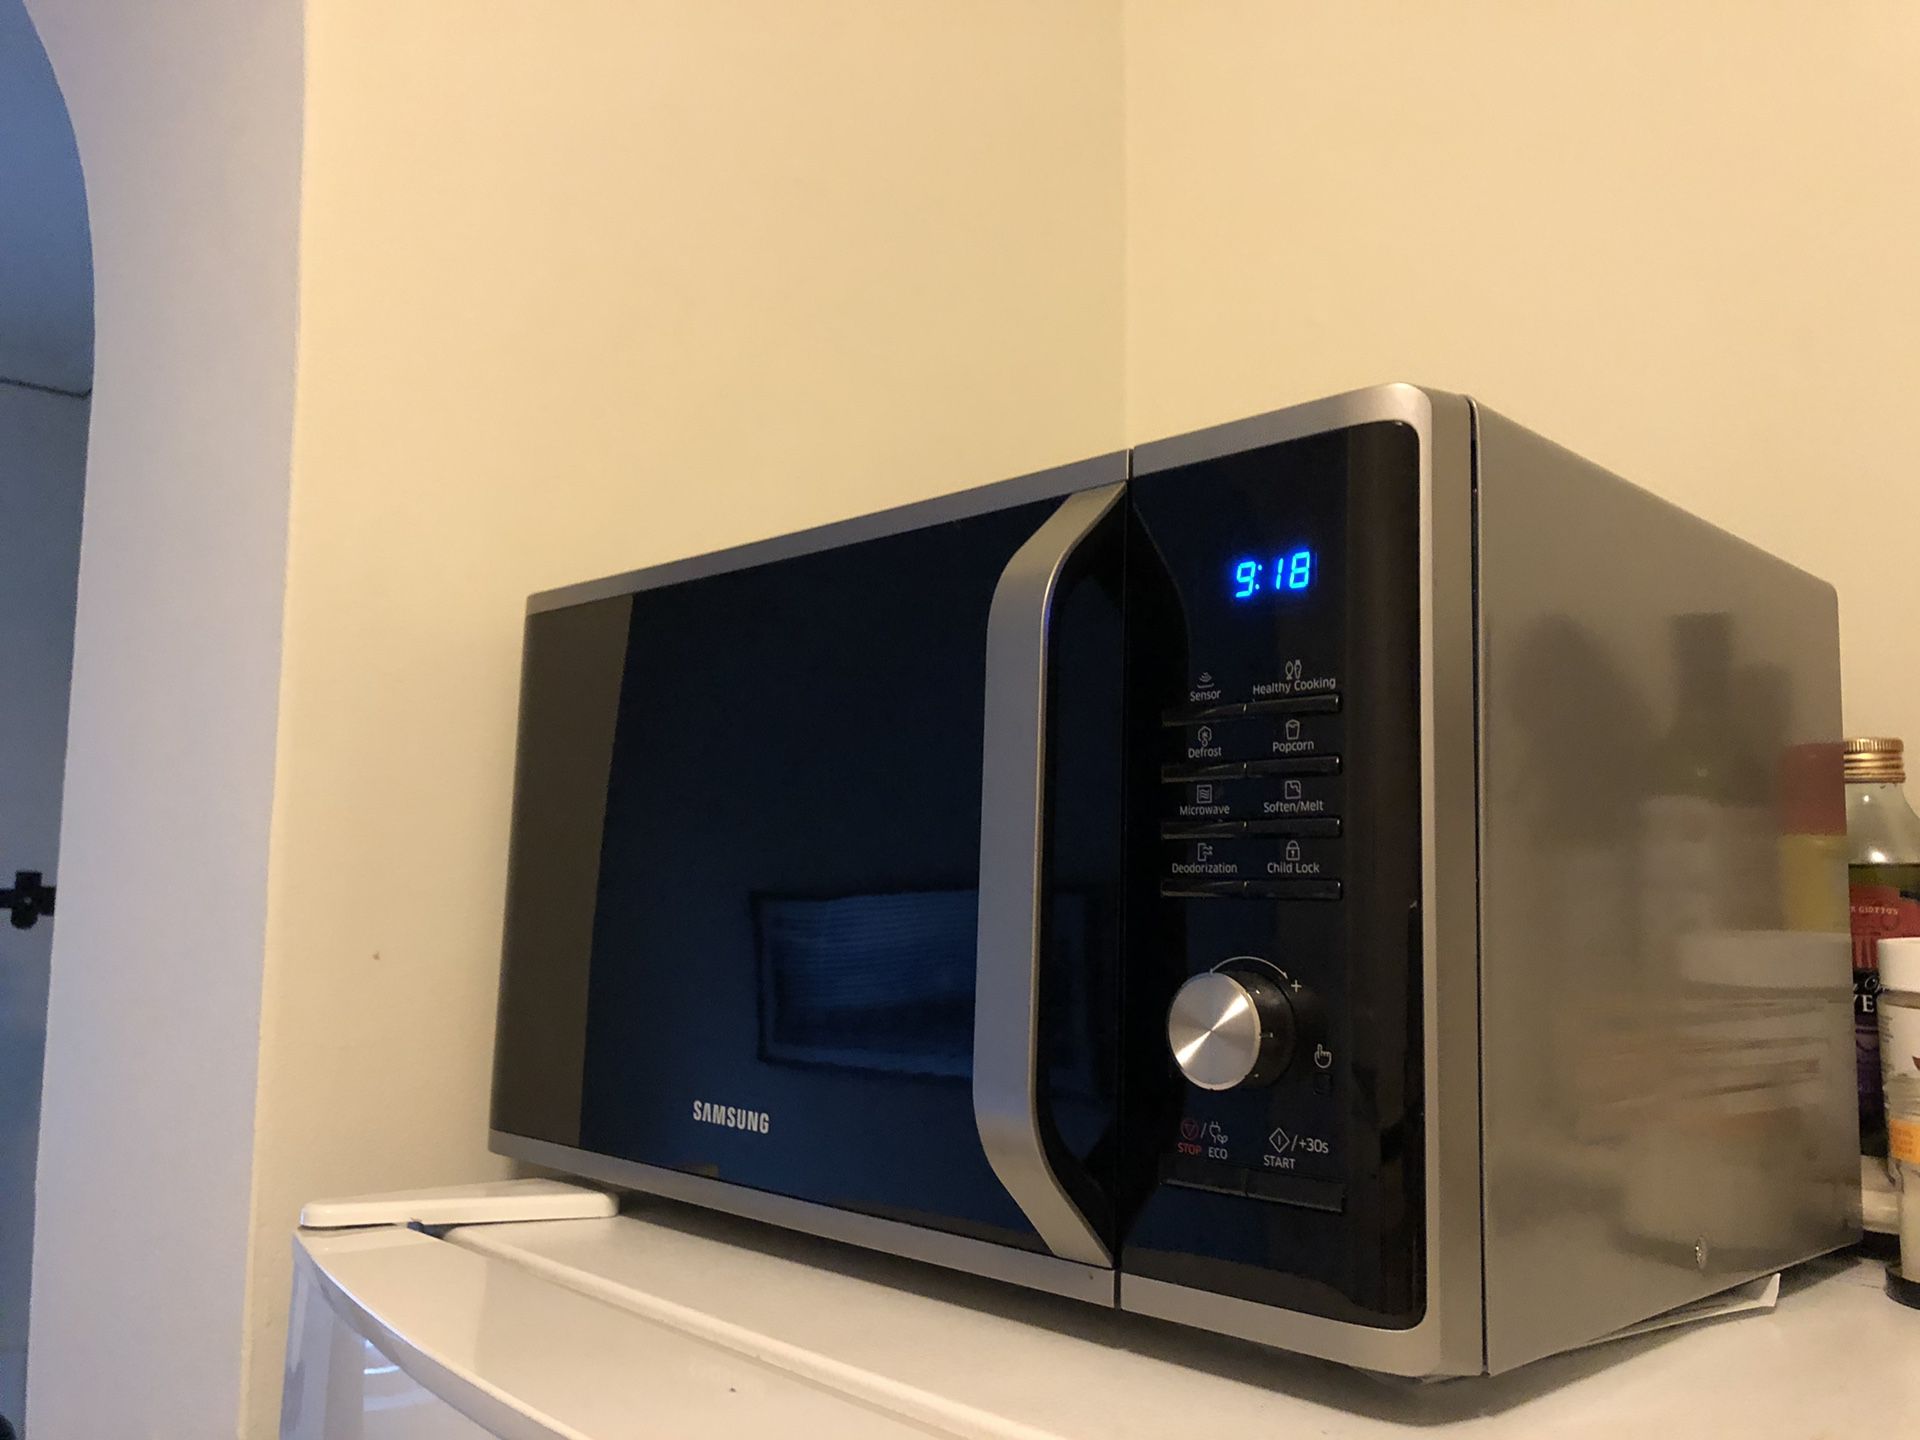 Samsung Microwave in brand new condition!